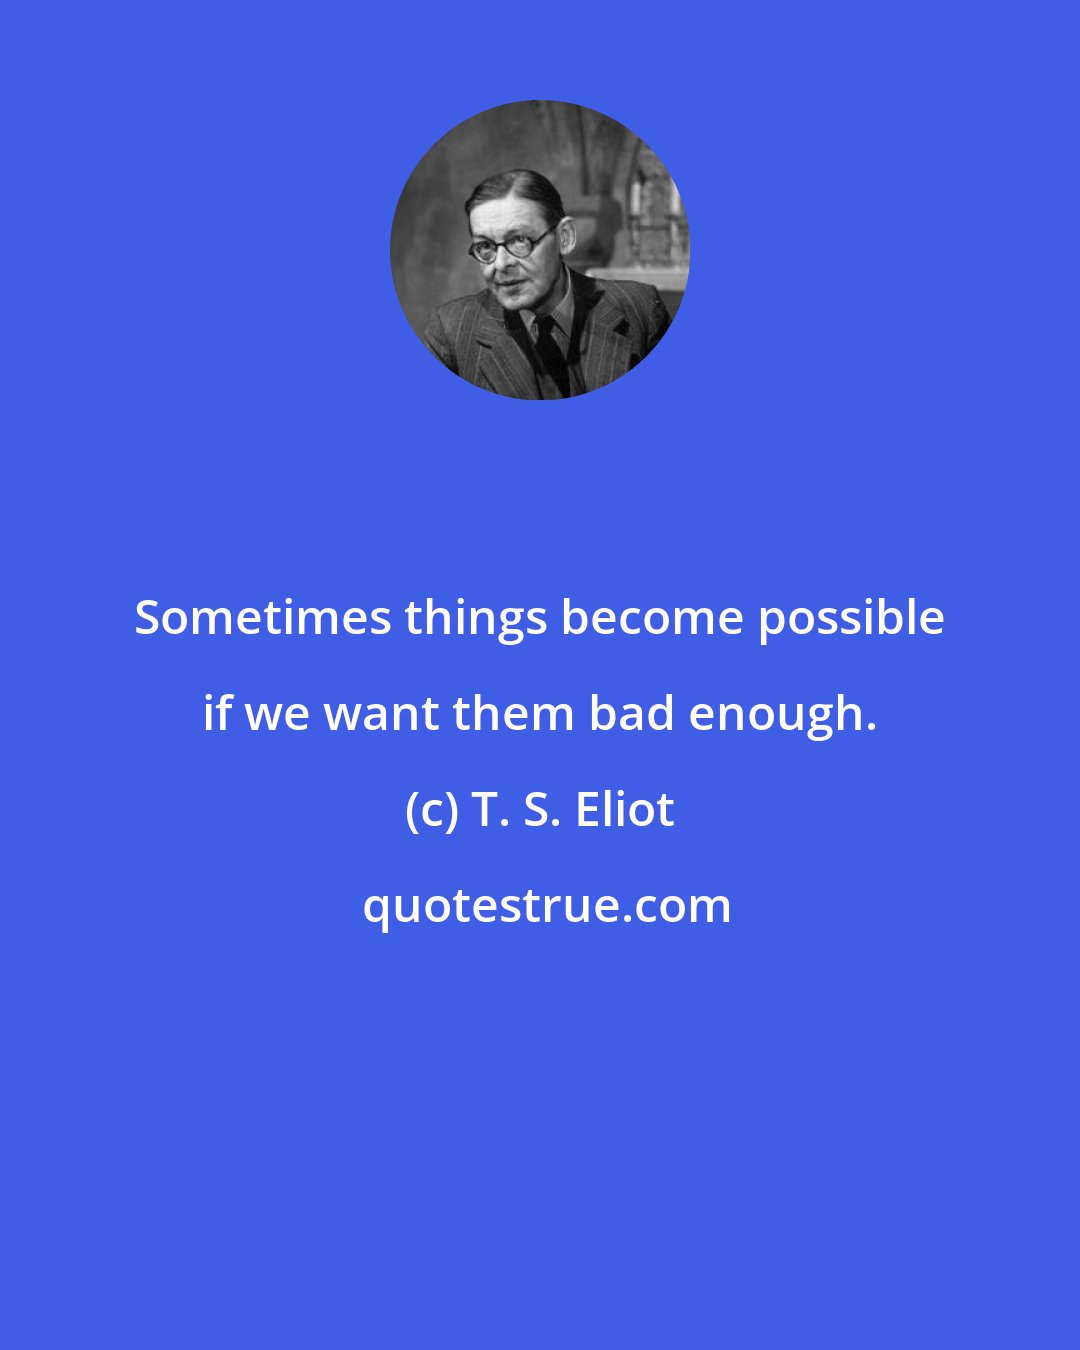 T. S. Eliot: Sometimes things become possible if we want them bad enough.